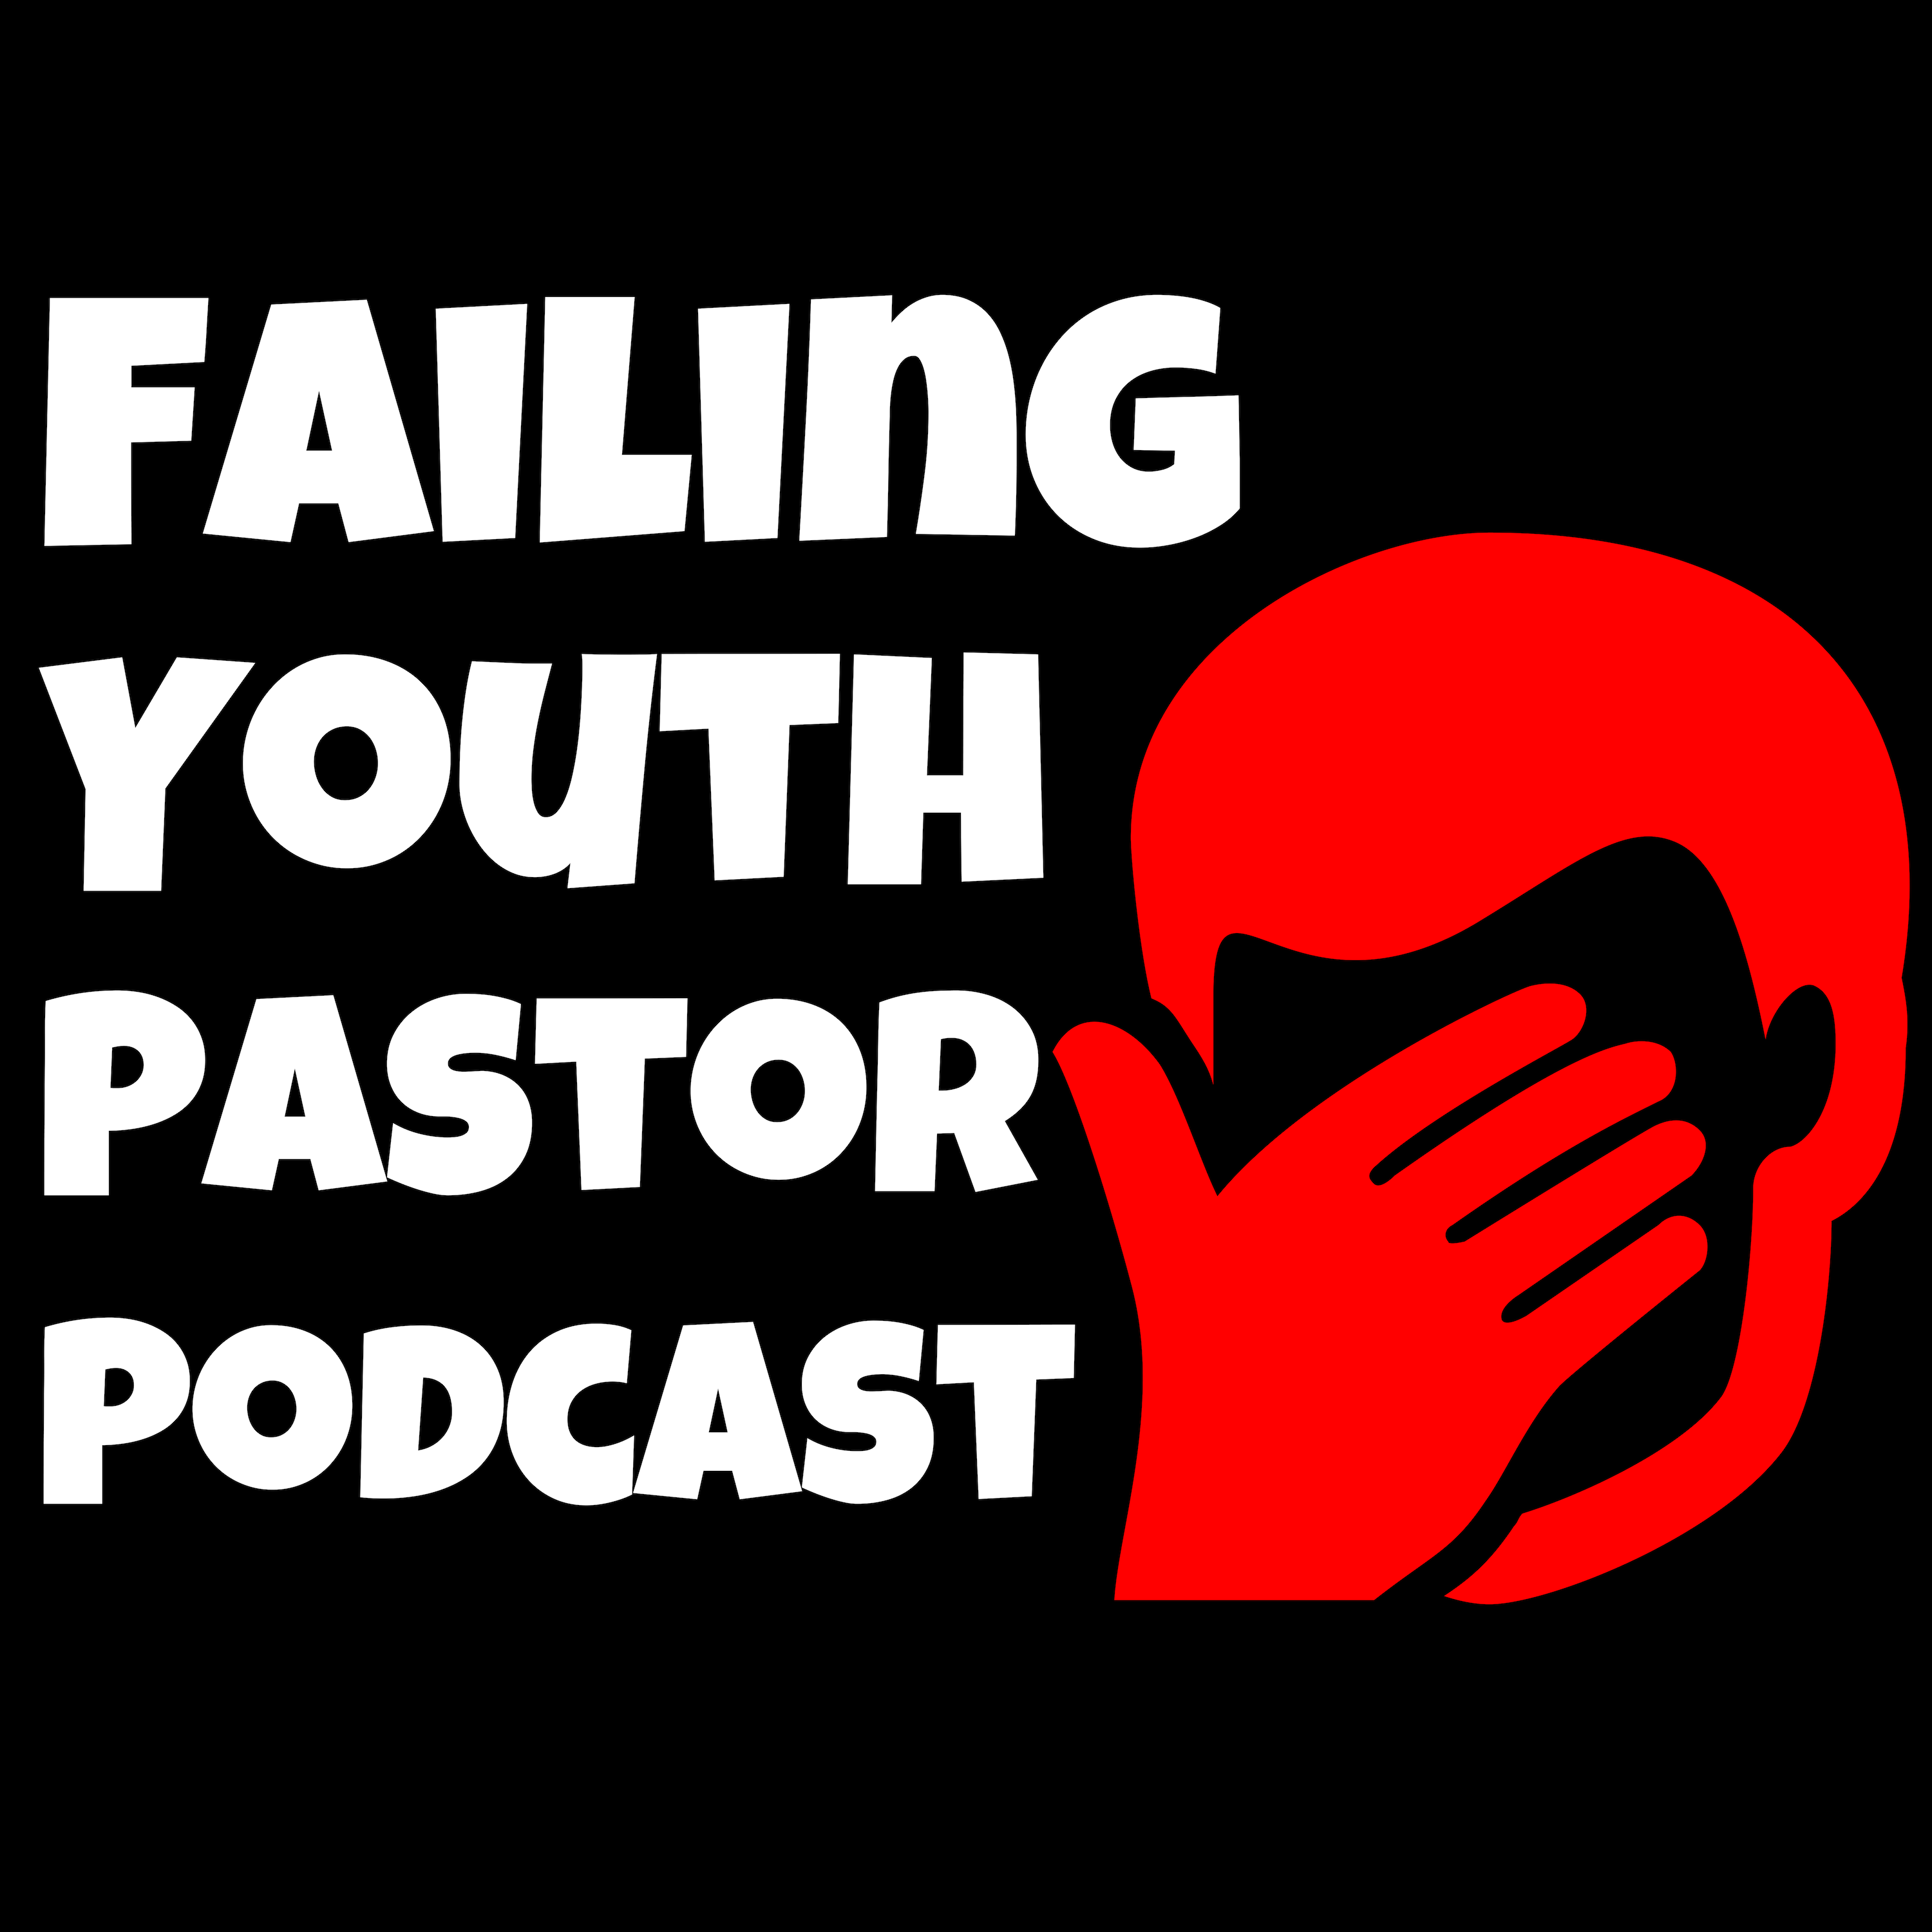 Failing Youth Pastor Podcast